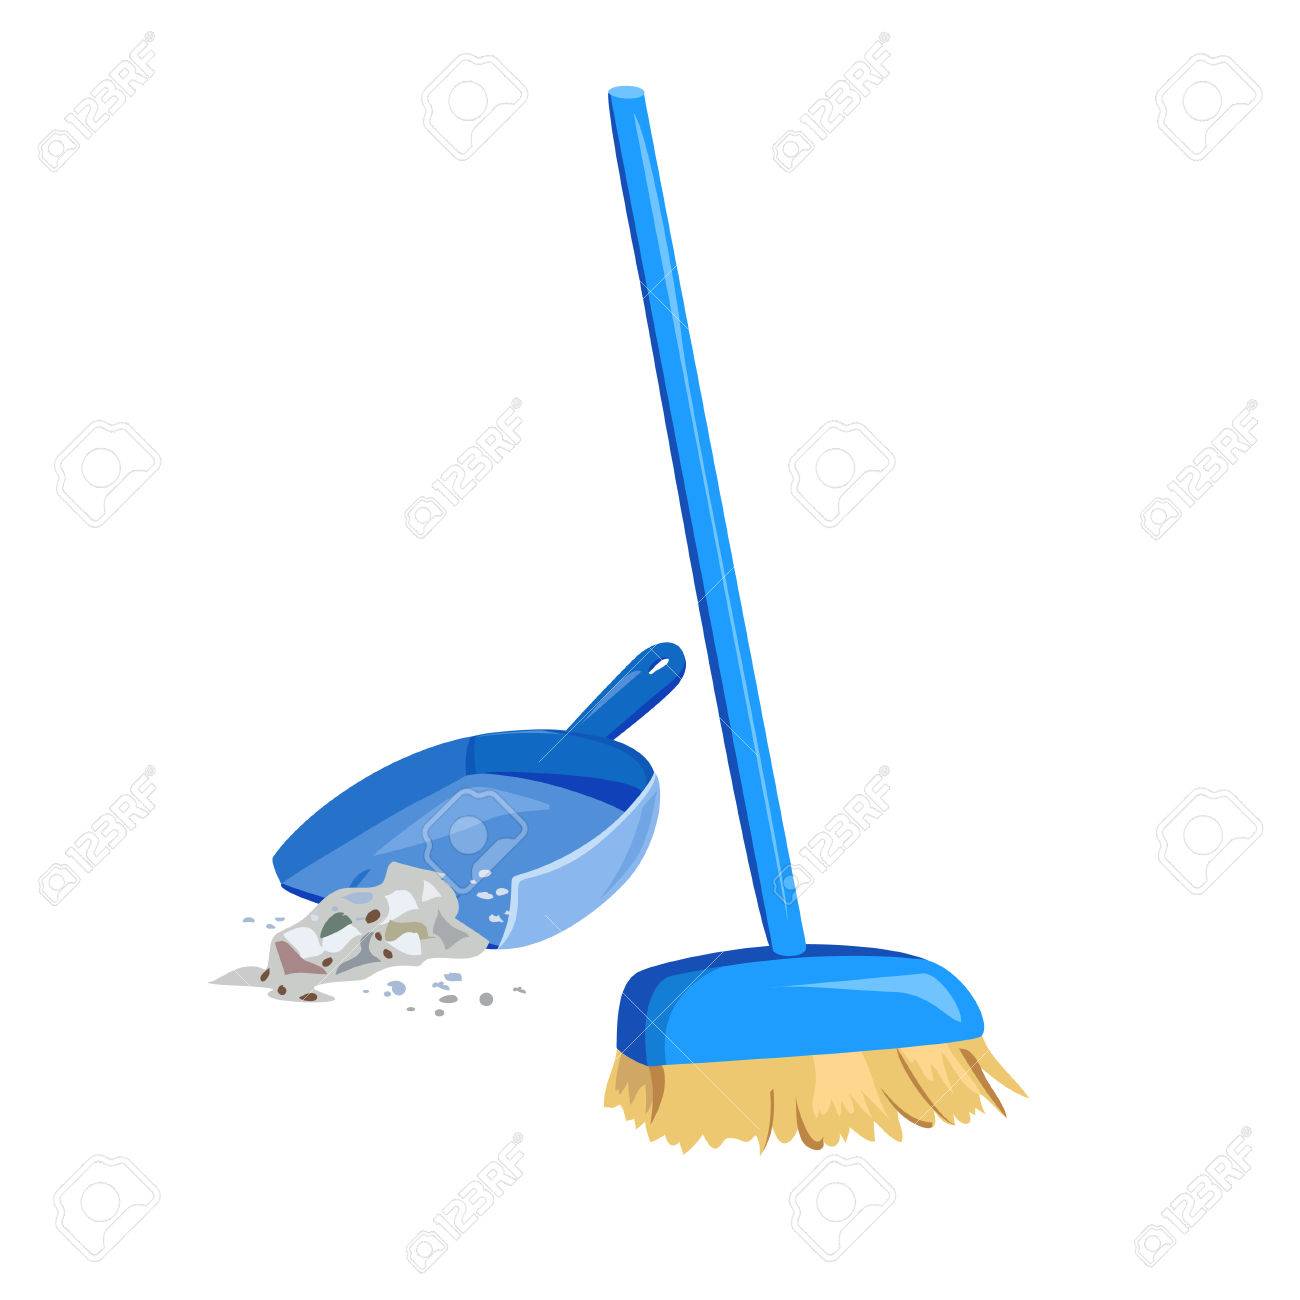 Cleaning garbage, broom and dustpan